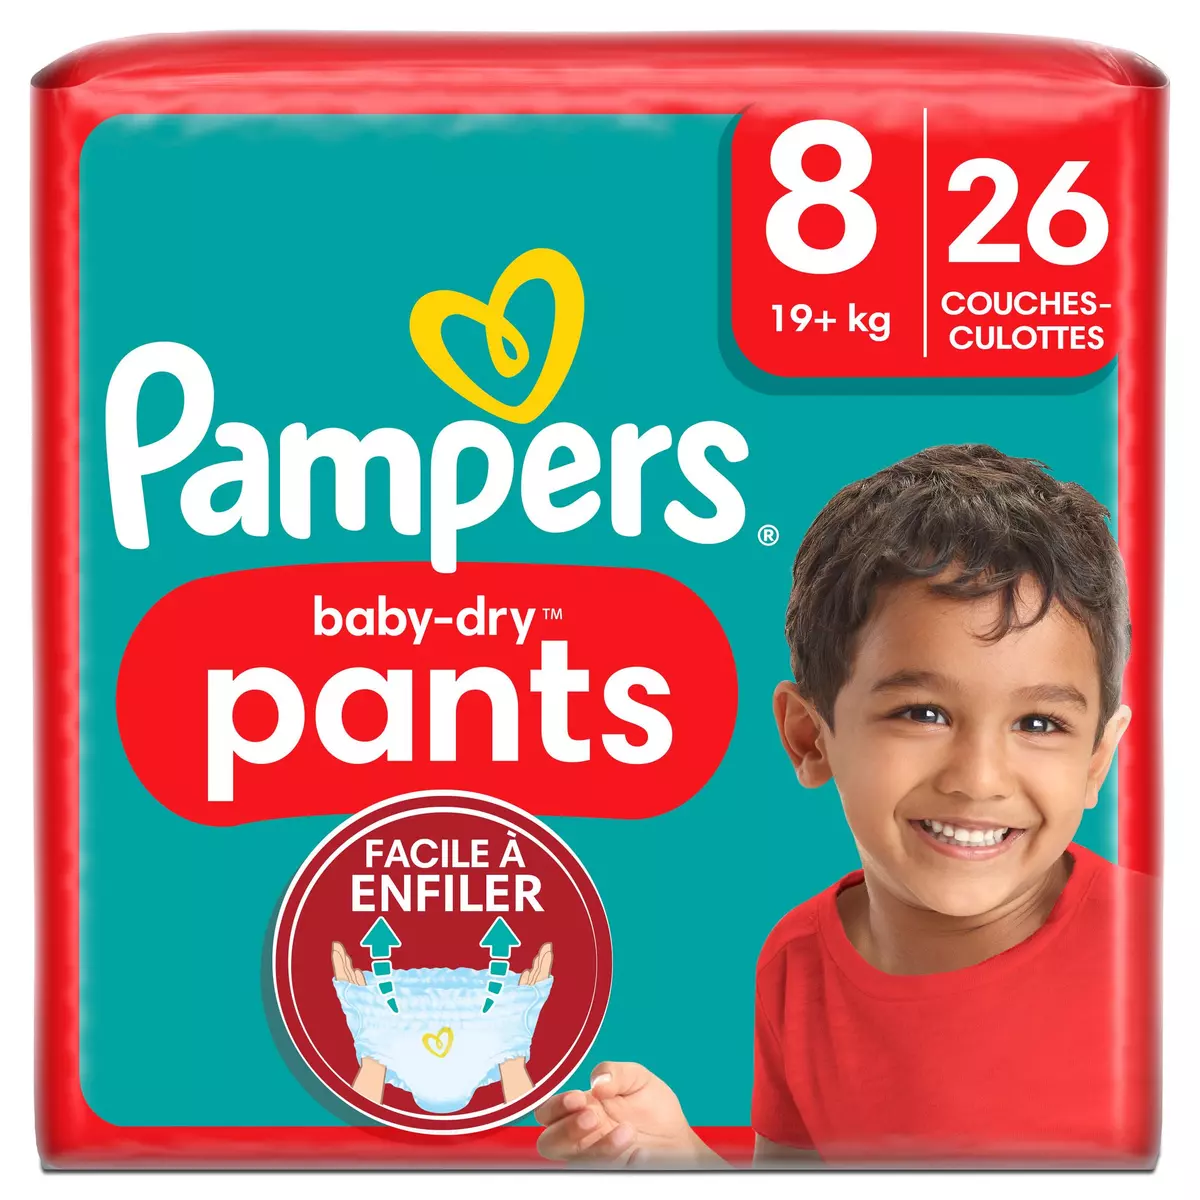 PAMPERS Baby-Dry pants couches-culottes taille 8 (+19kg) 26 couches